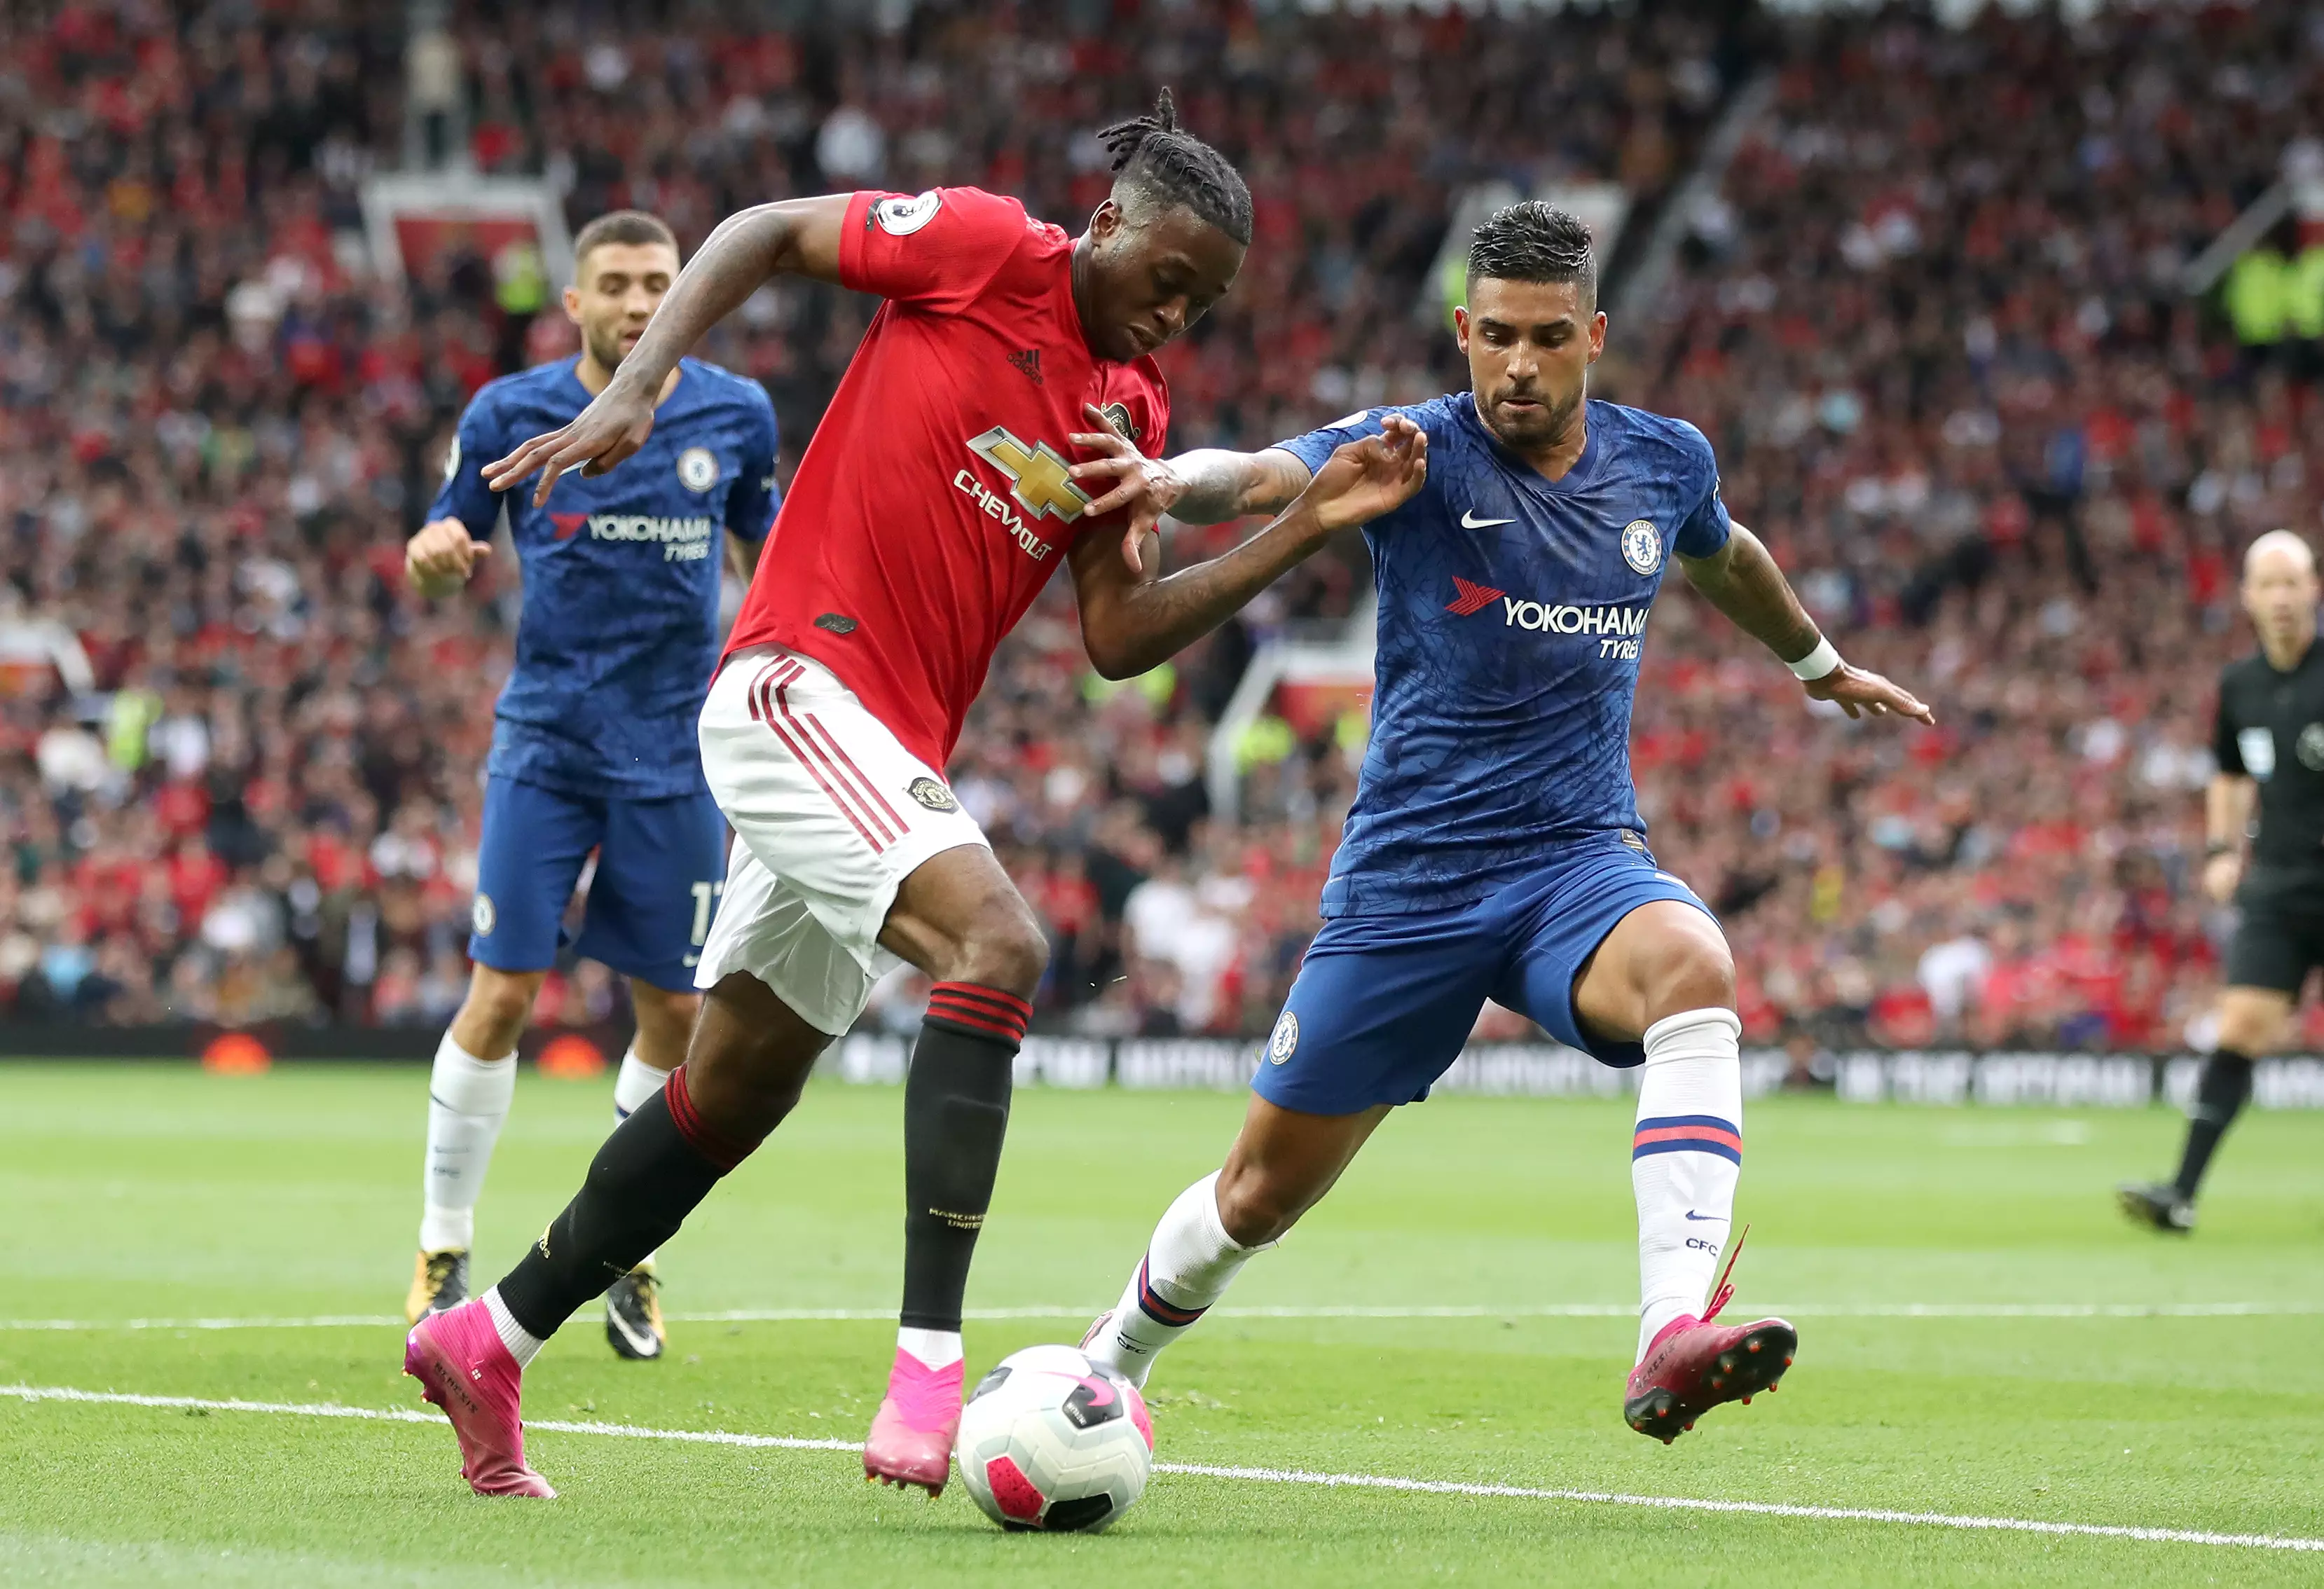 Aaron Wan-Bissaka made an impressive debut for Manchester United on Sunday